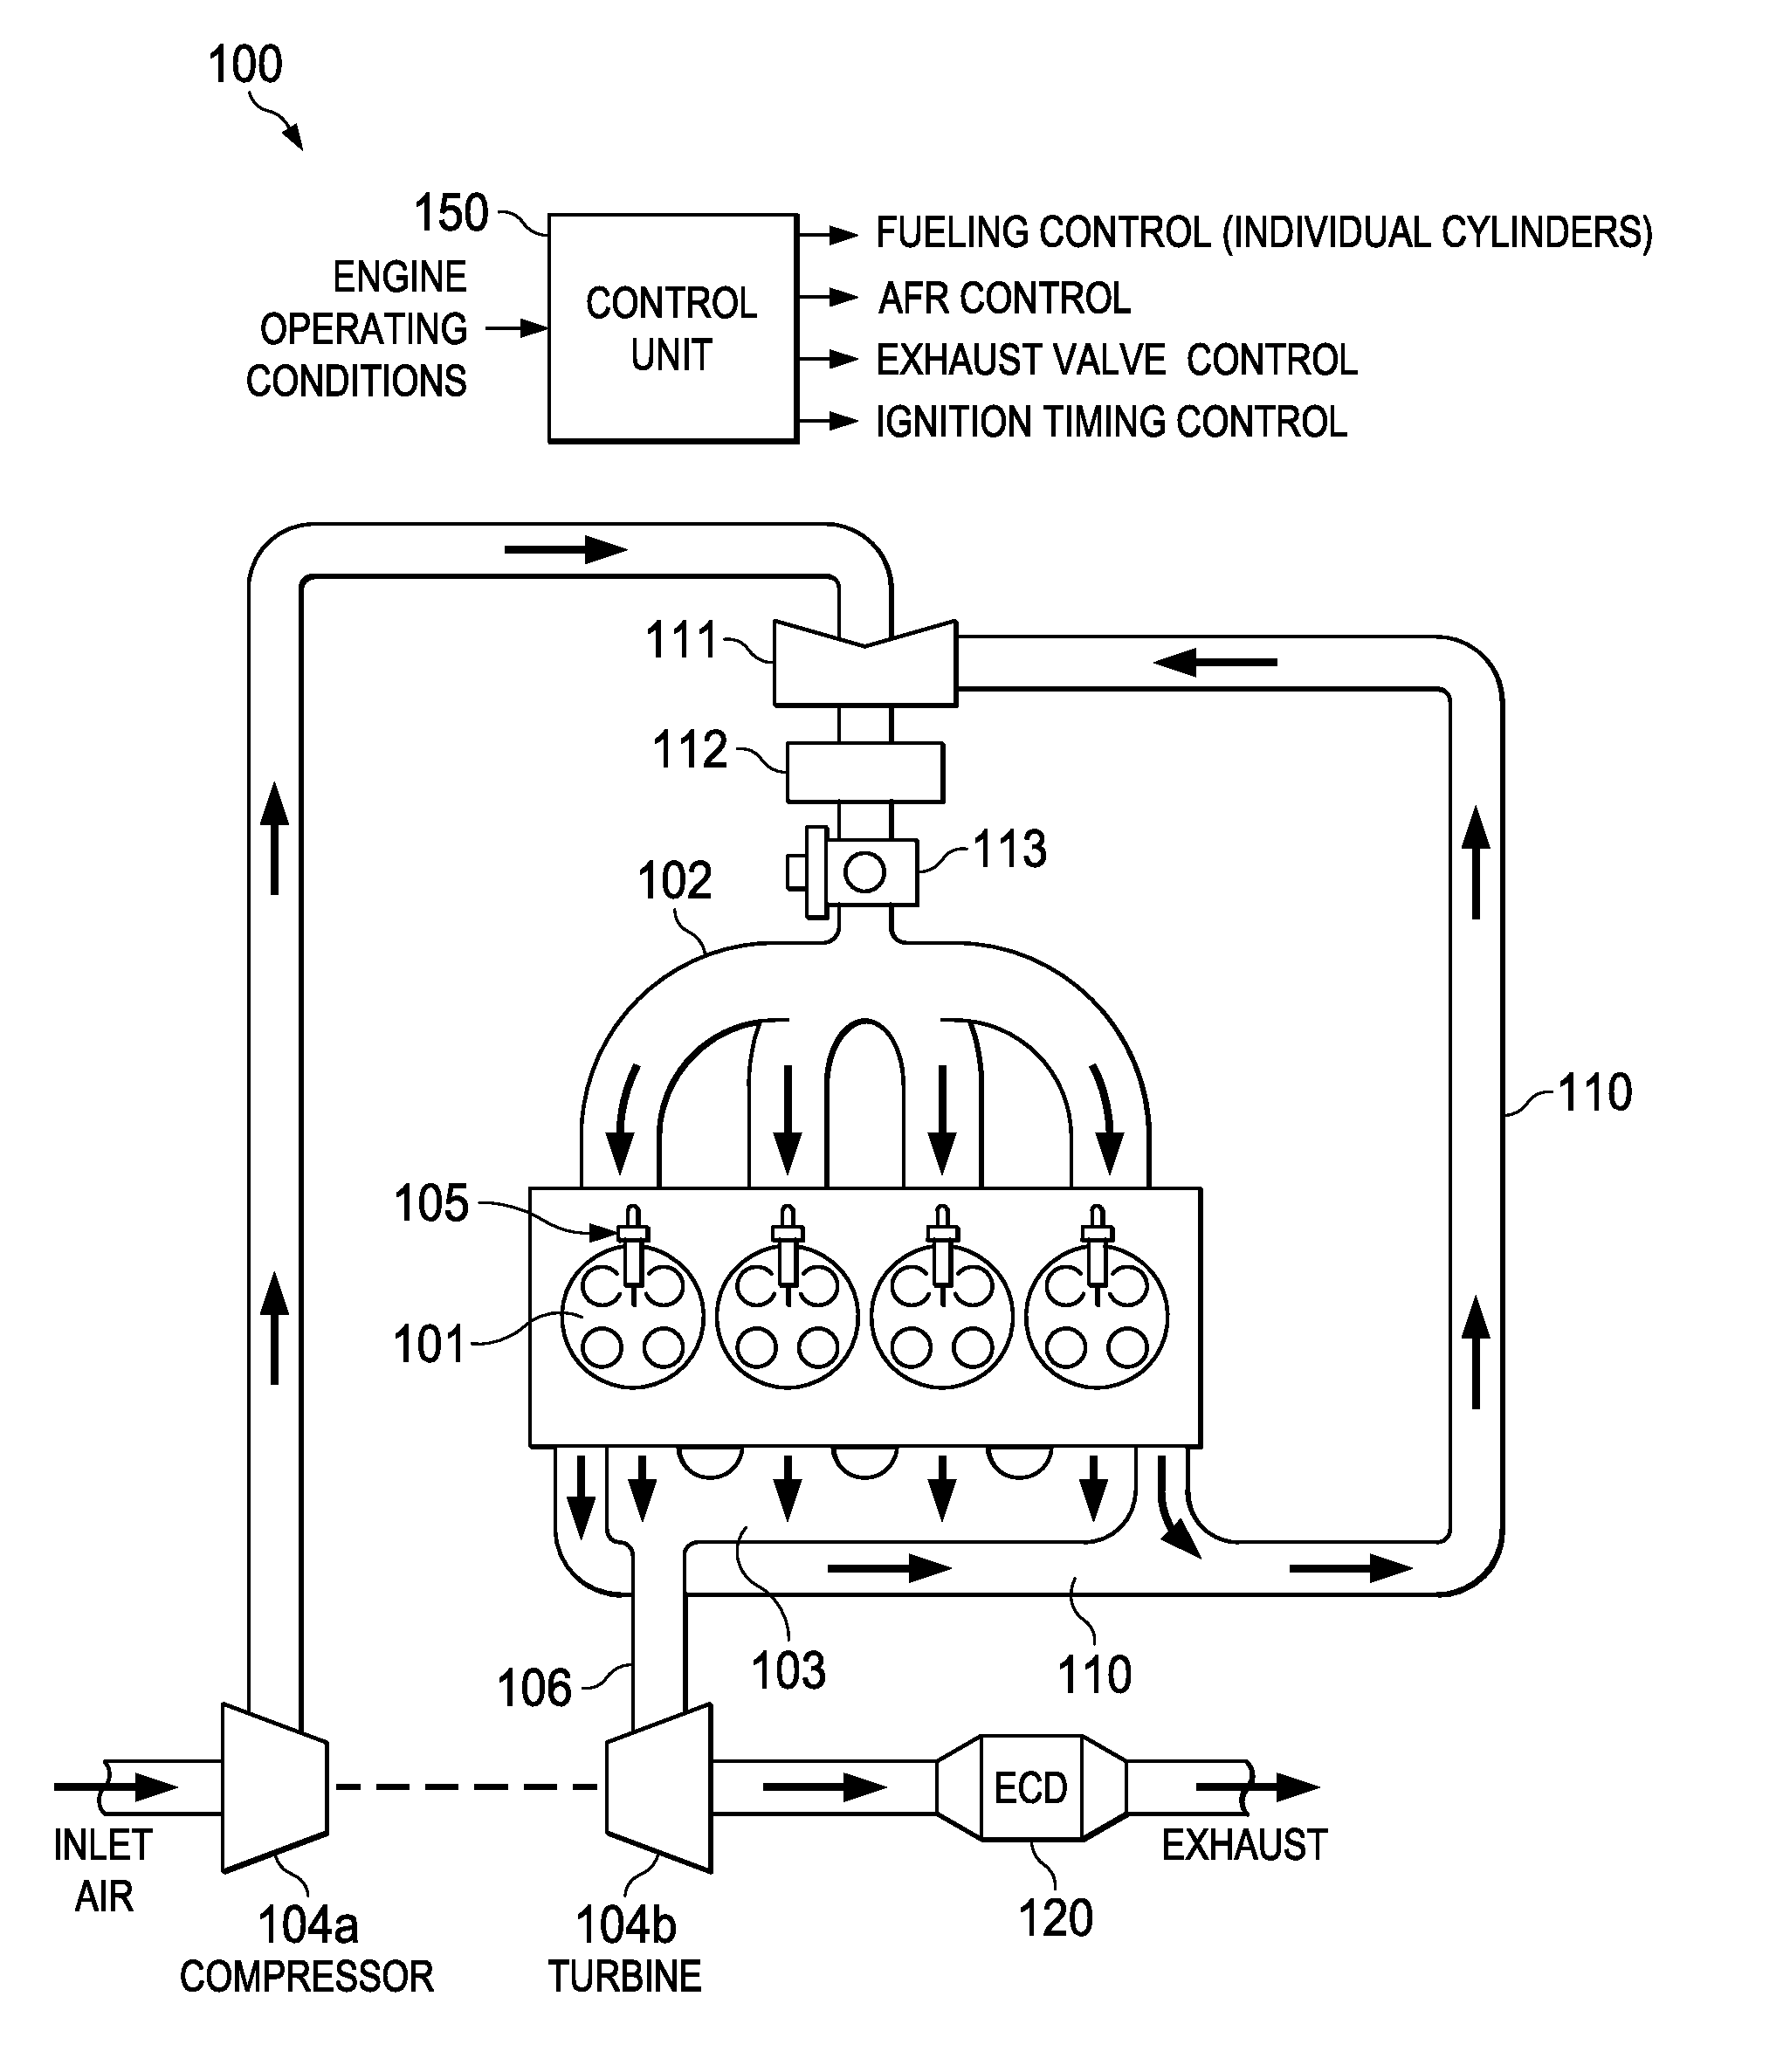 EGR Rate Control For Internal Combustion Engine With Dual Exhaust-Ported Cylinders